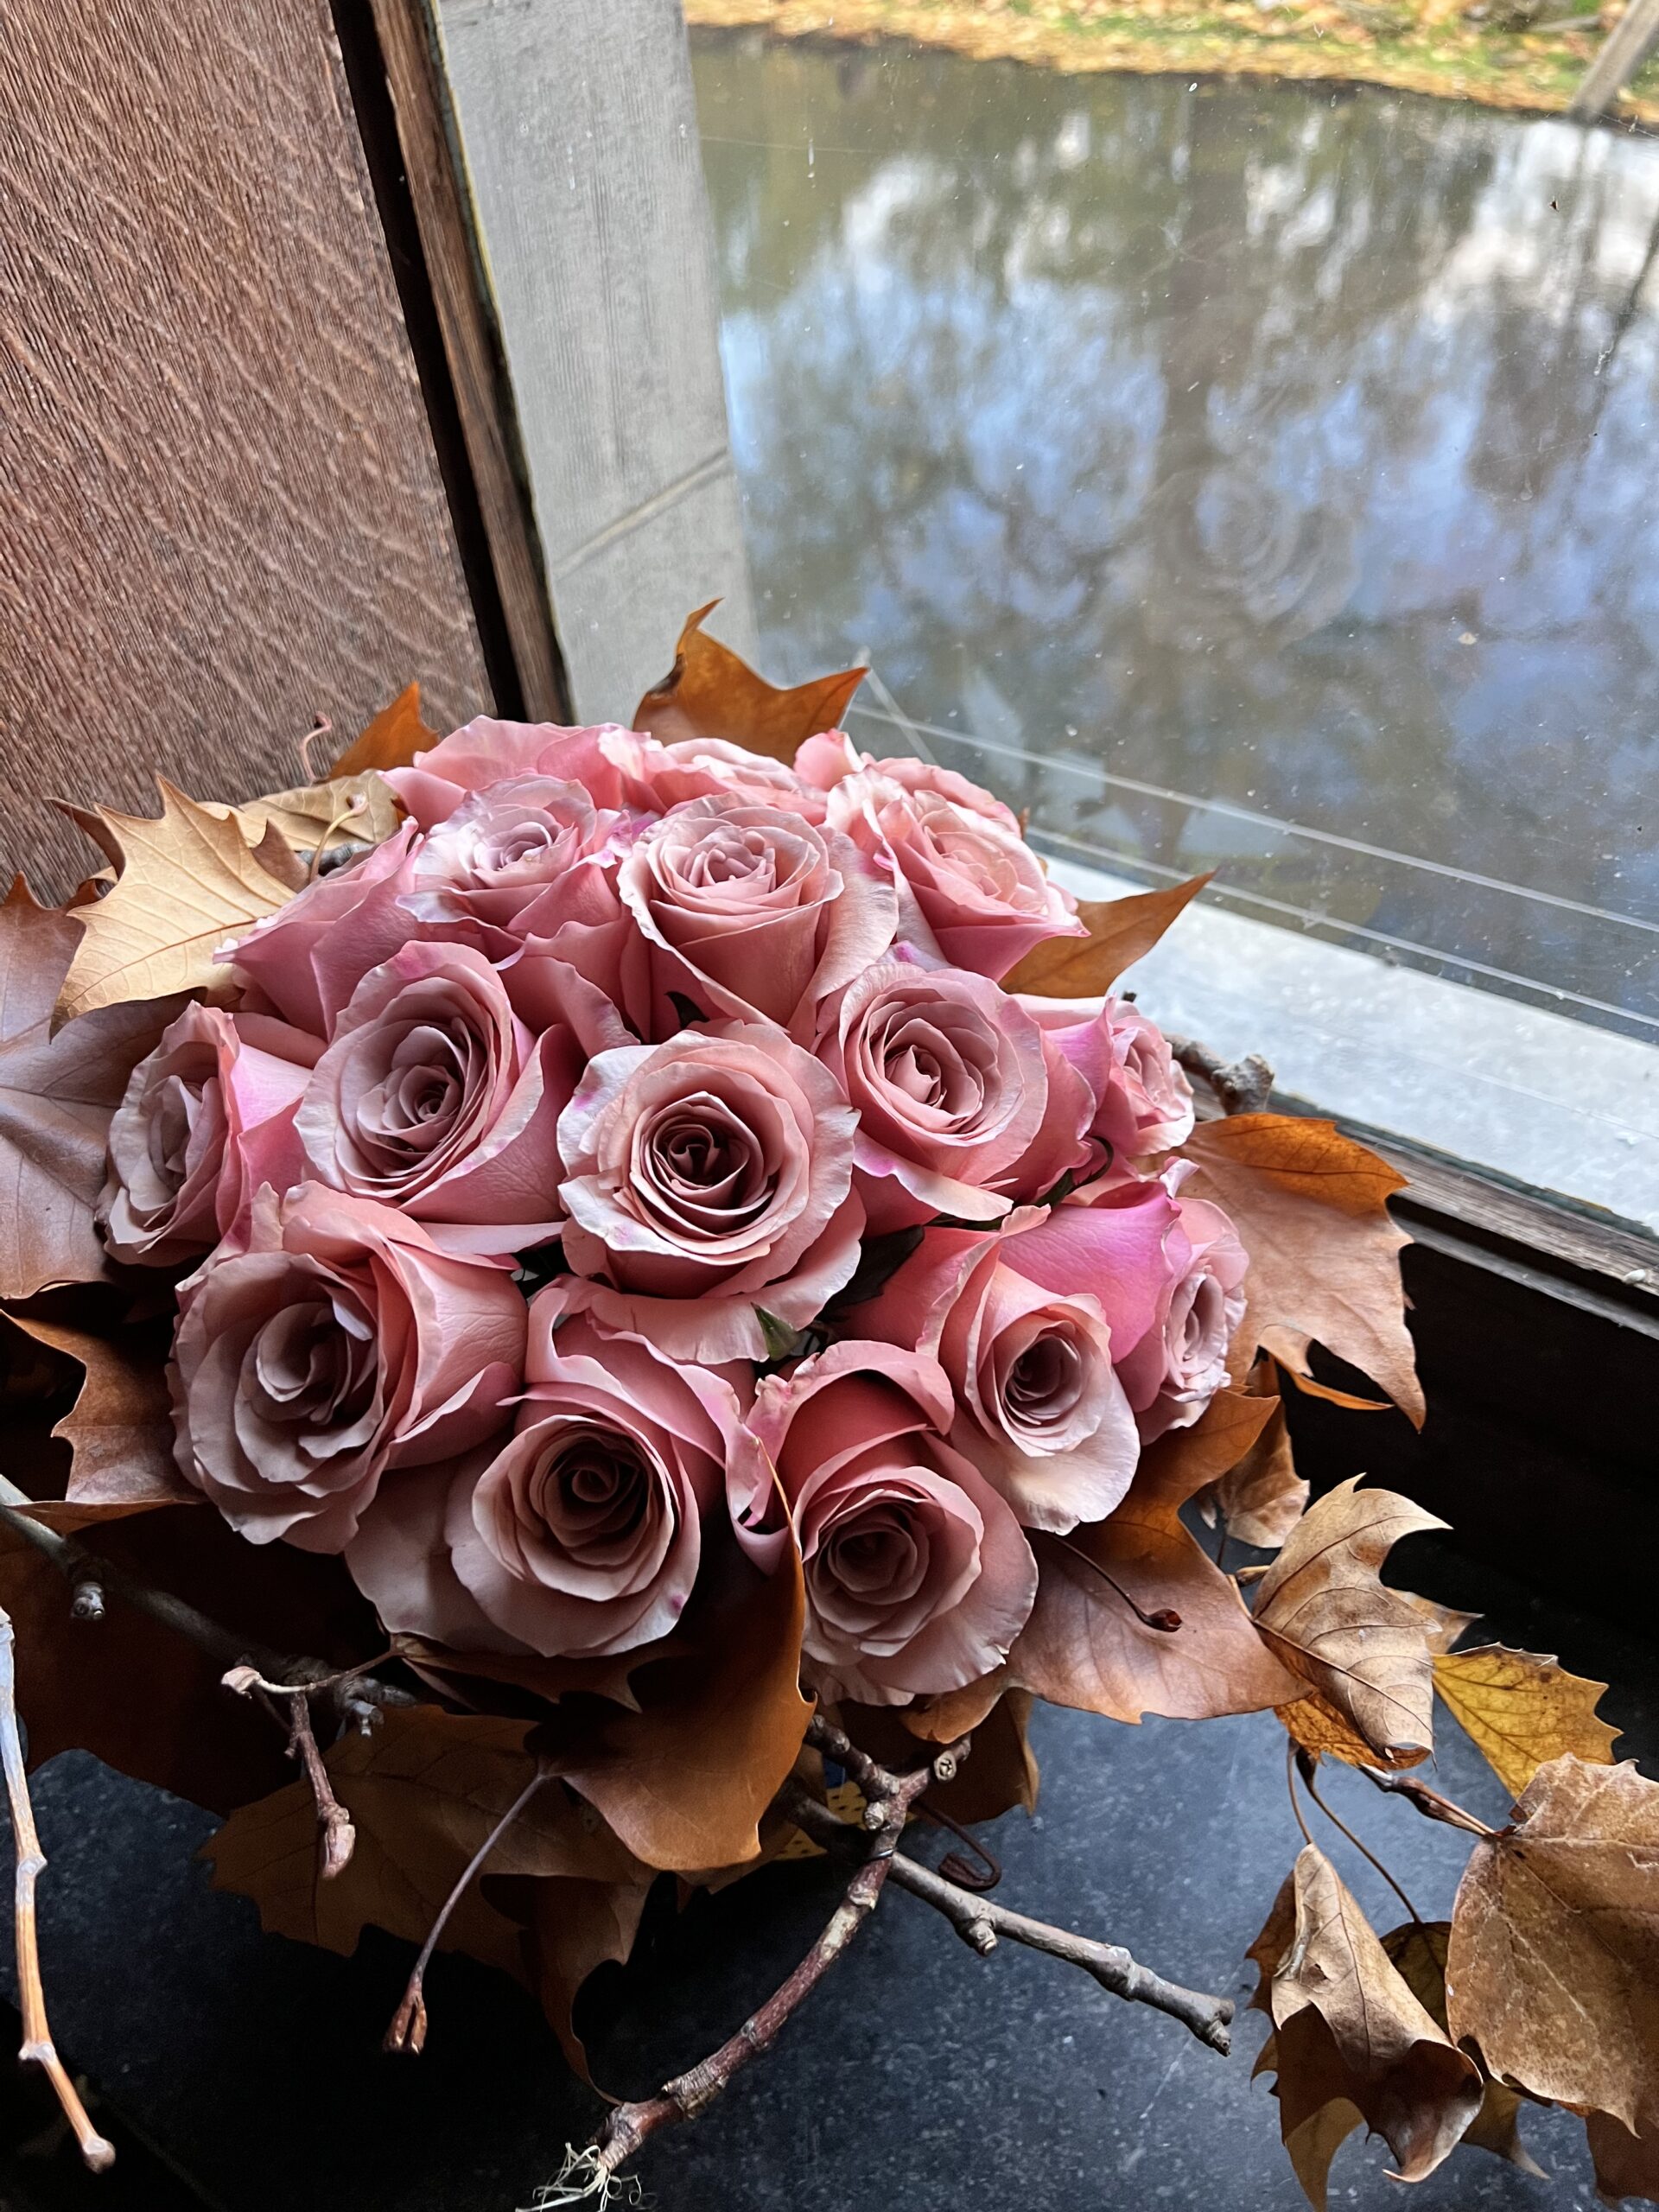 Hand-tied Bouquet for Pick up — Cornell Florist